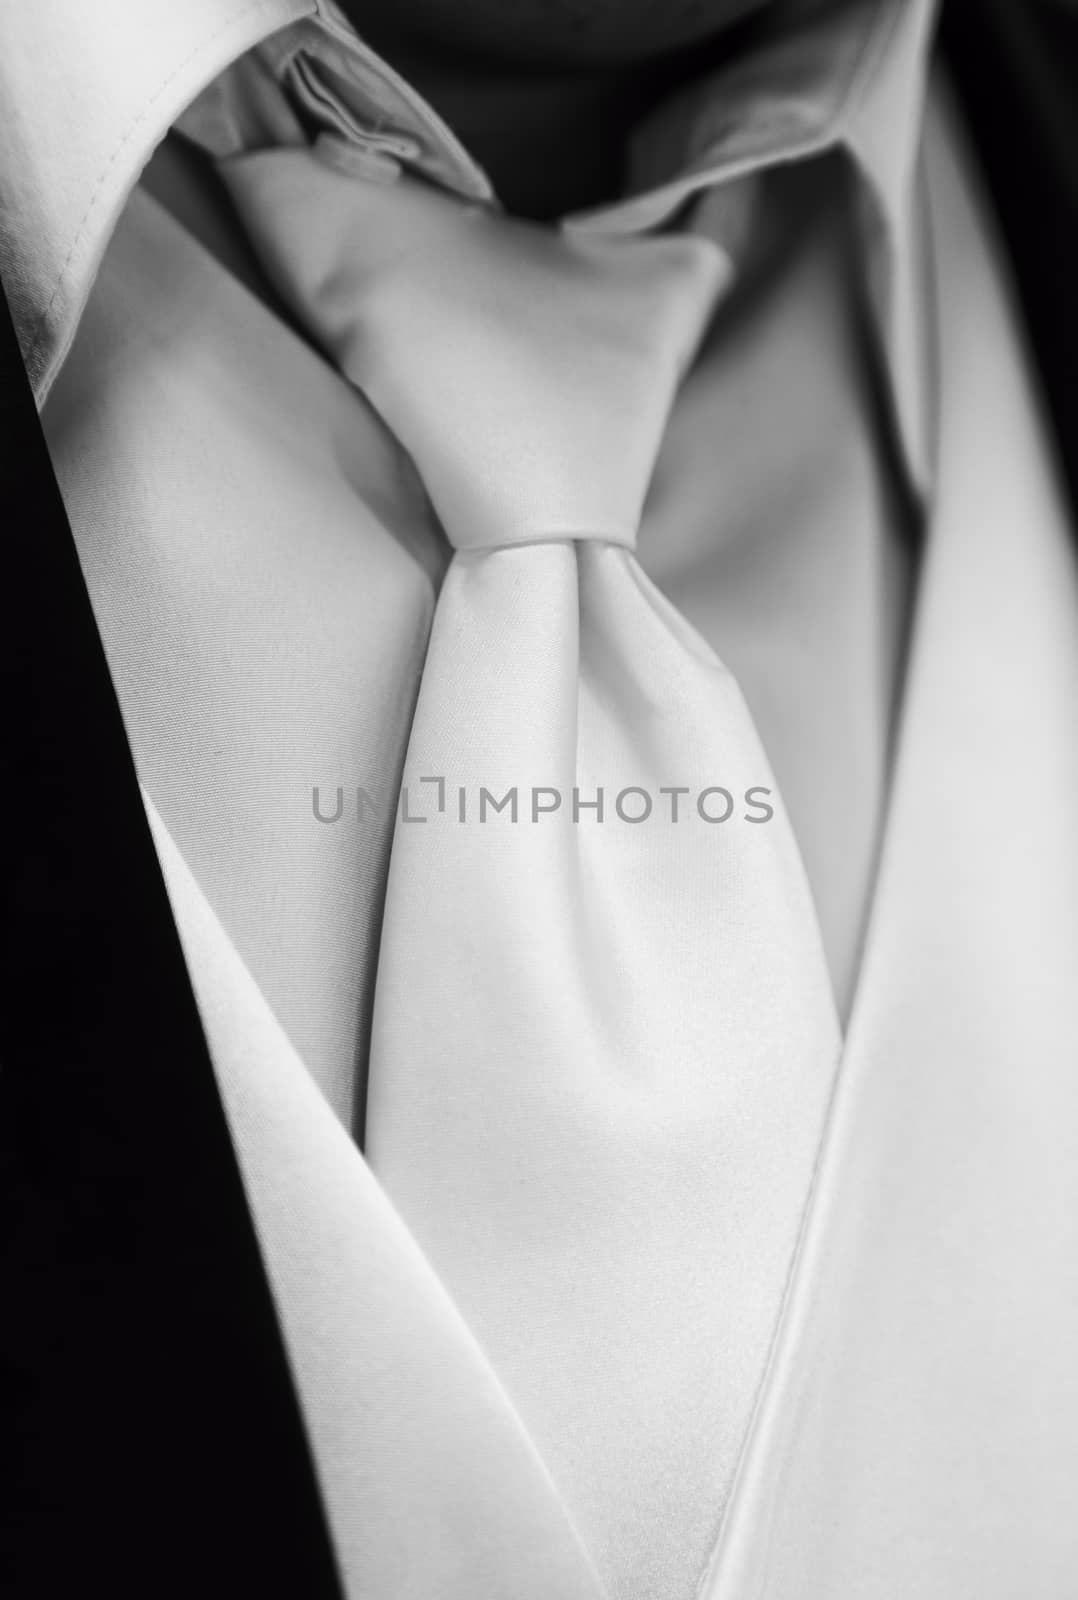 Grooms Tie in Black and White by fallesenphotography